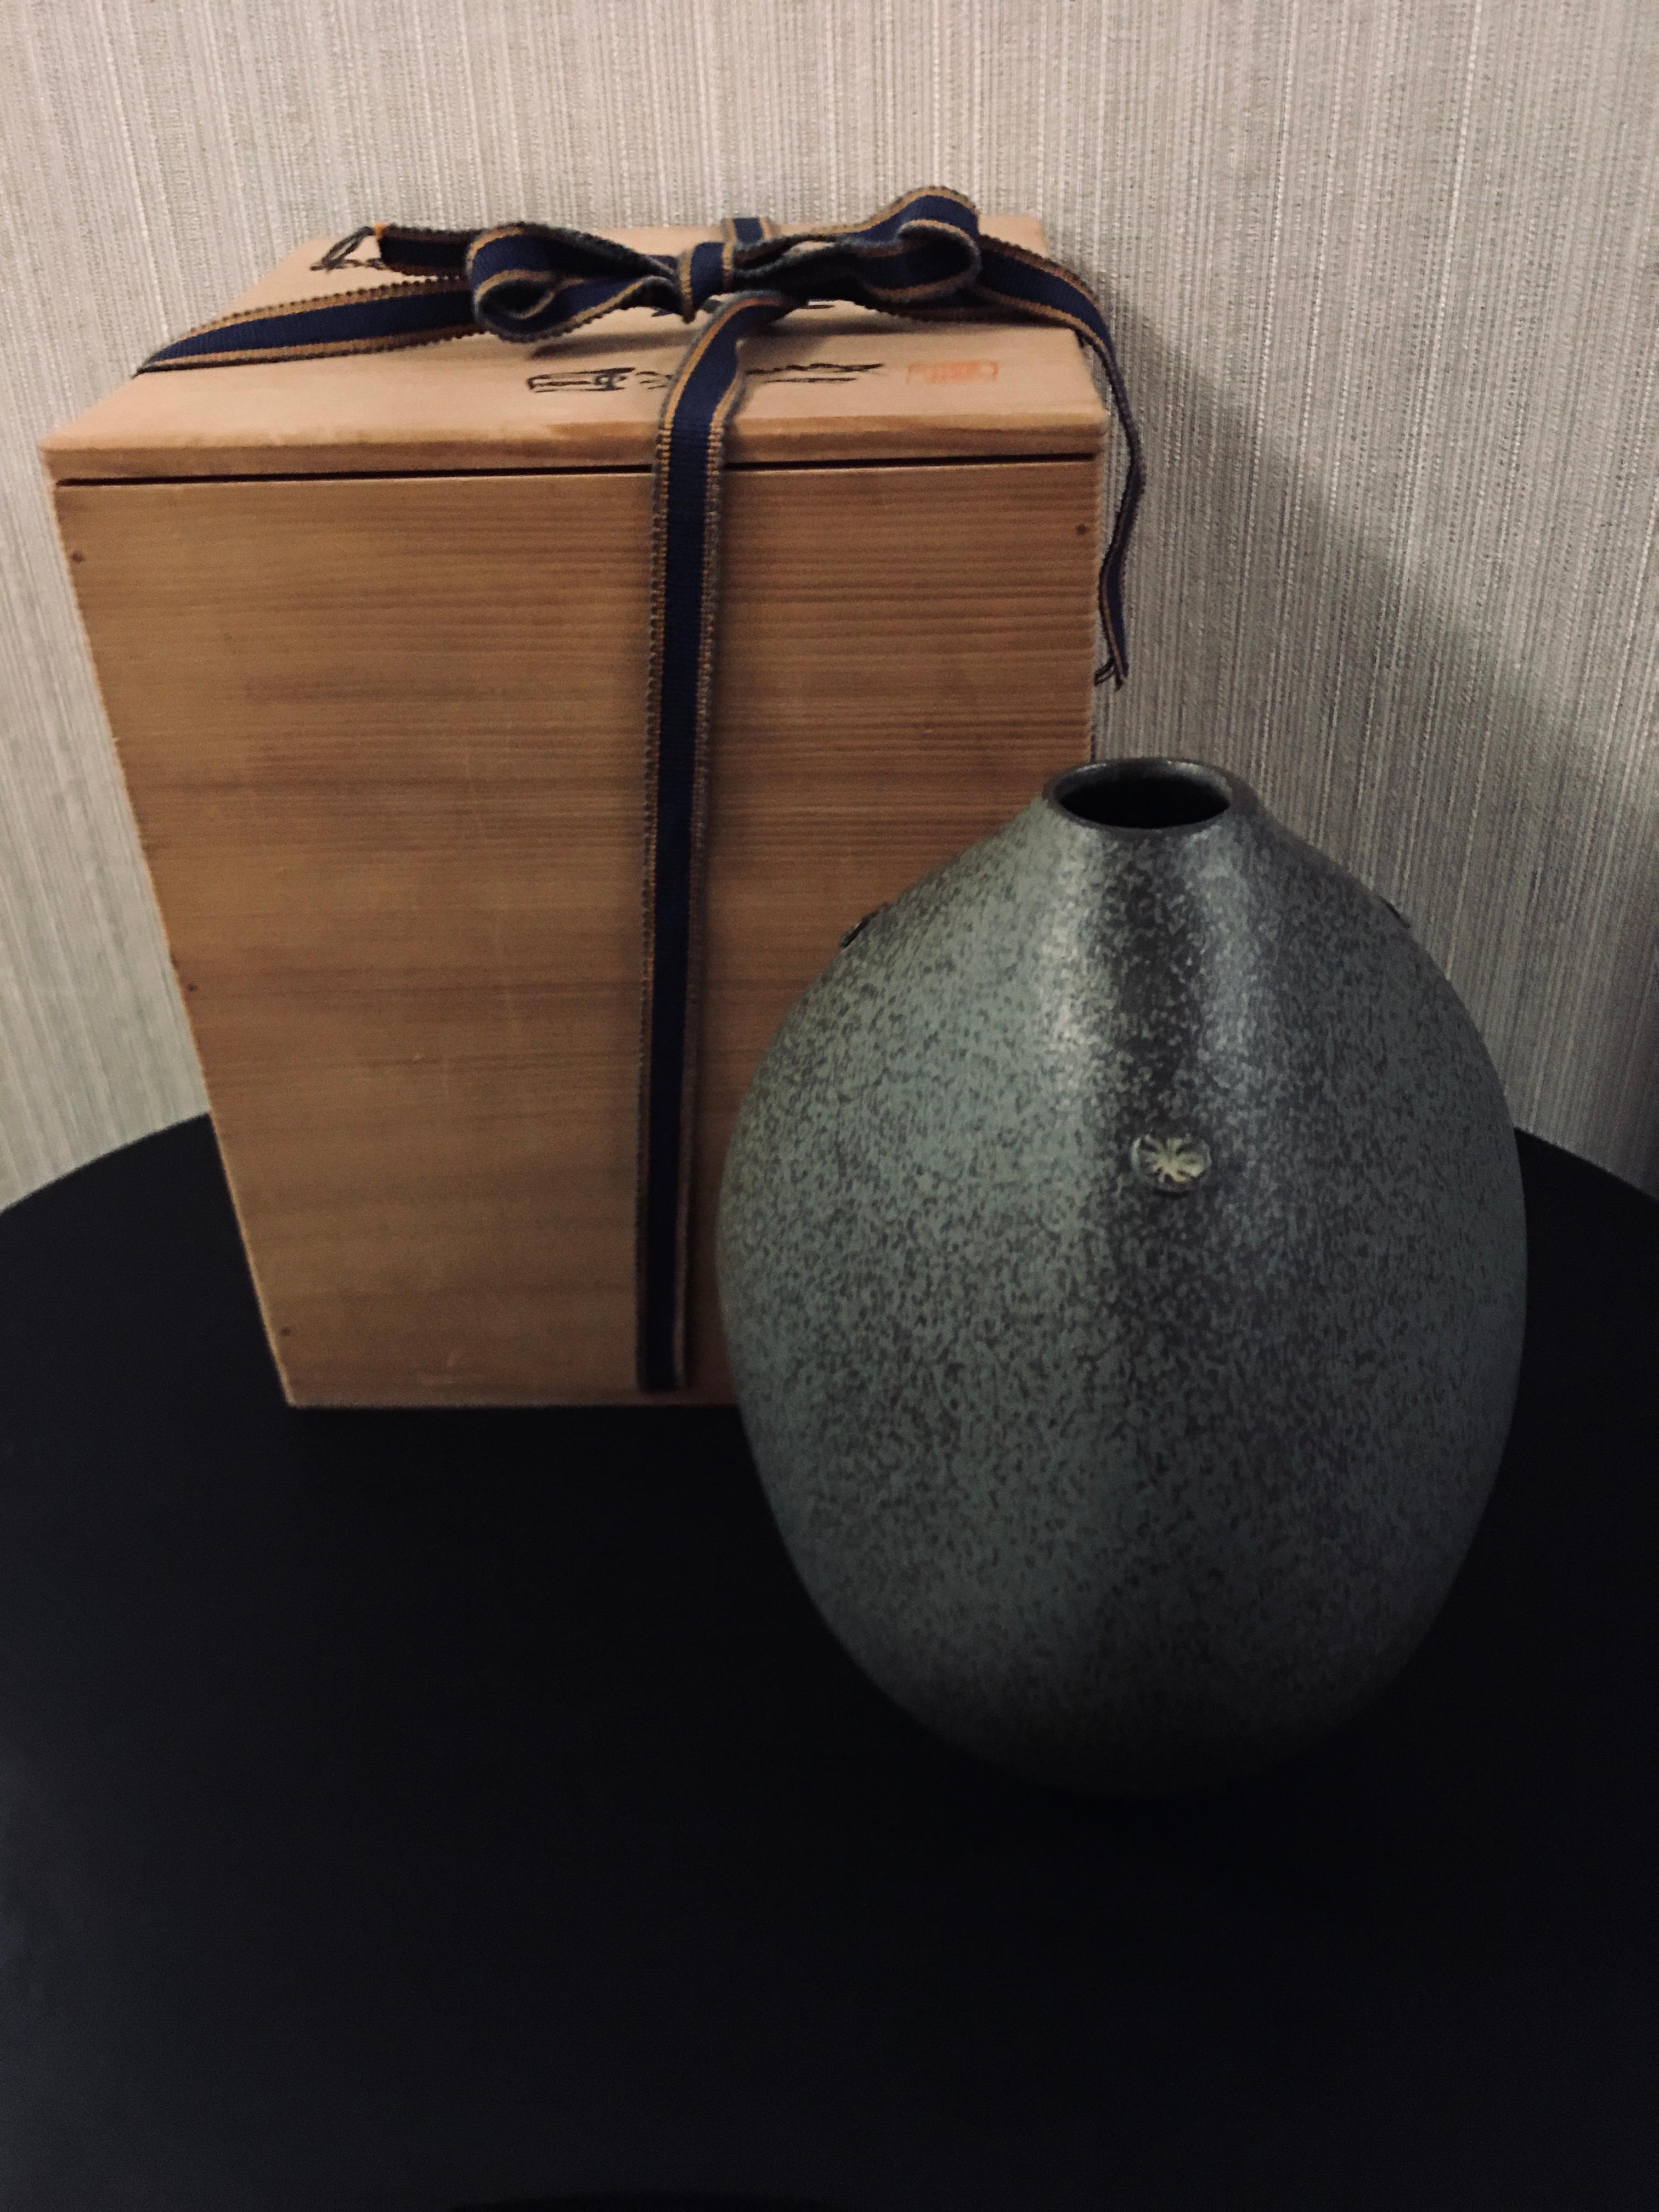 786 Japanese Kiyomizu-ware. Emperor Showa from 1926 to 1989 – 1990. Ca. 1970. 9” high x 6 ½” wide. Fine condition. Signed, features a fine gray glaze with flex of black glaze ,vase of dramatic oval form with mon accents signed box Kiyomizu ware